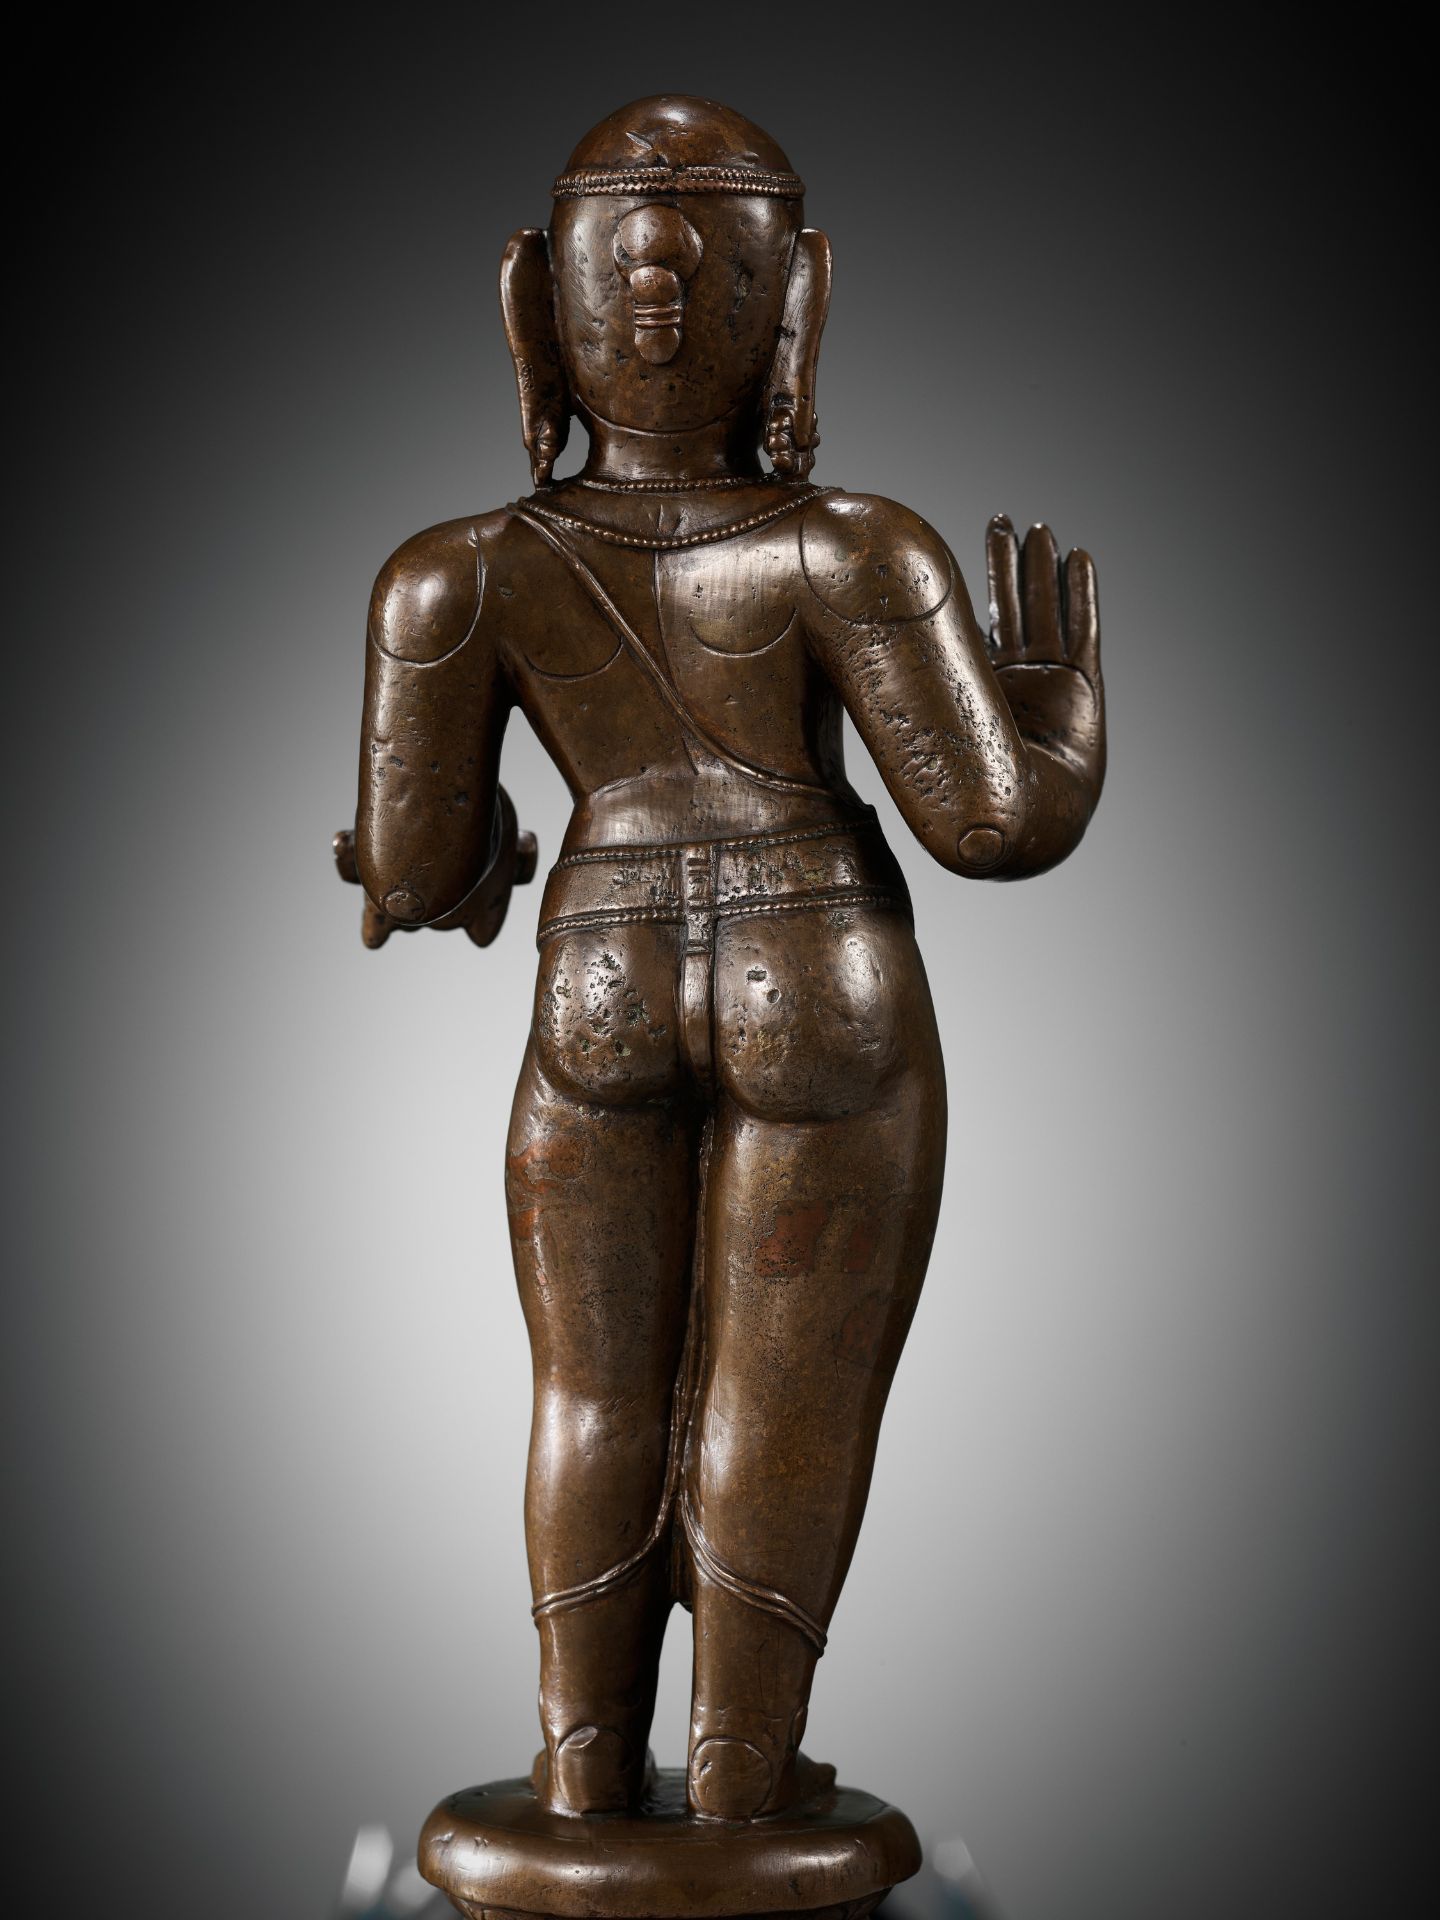 A LARGE COPPER ALLOY FIGURE OF MANIKKAVACAKAR, TAMIL NADU, 14TH-15TH CENTURY - Image 13 of 16